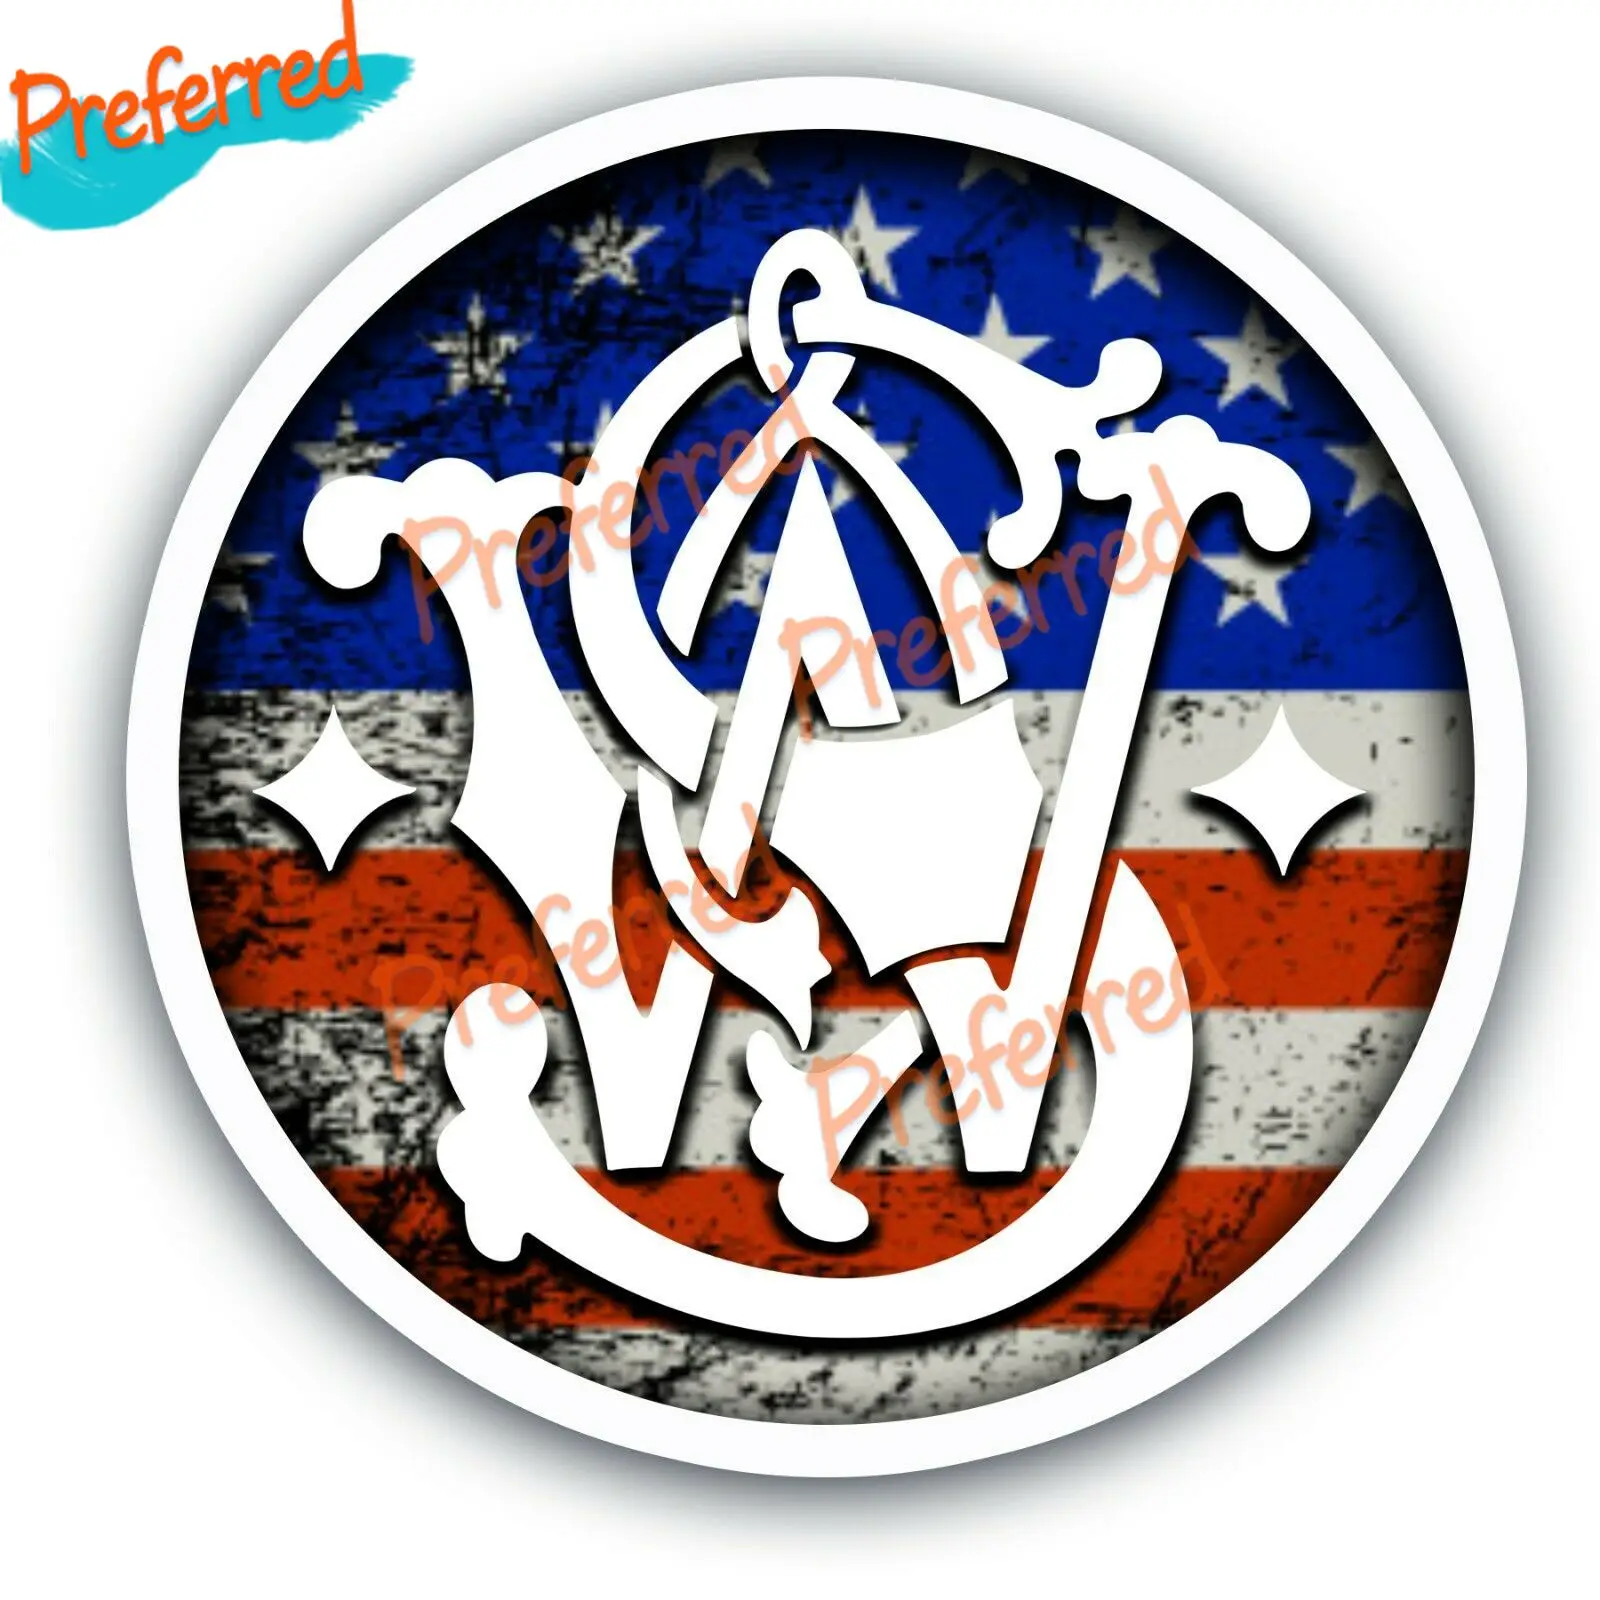 Smith & Wesson American Flag & Performance Center Gun Decal/Stickers ORIGINAL 